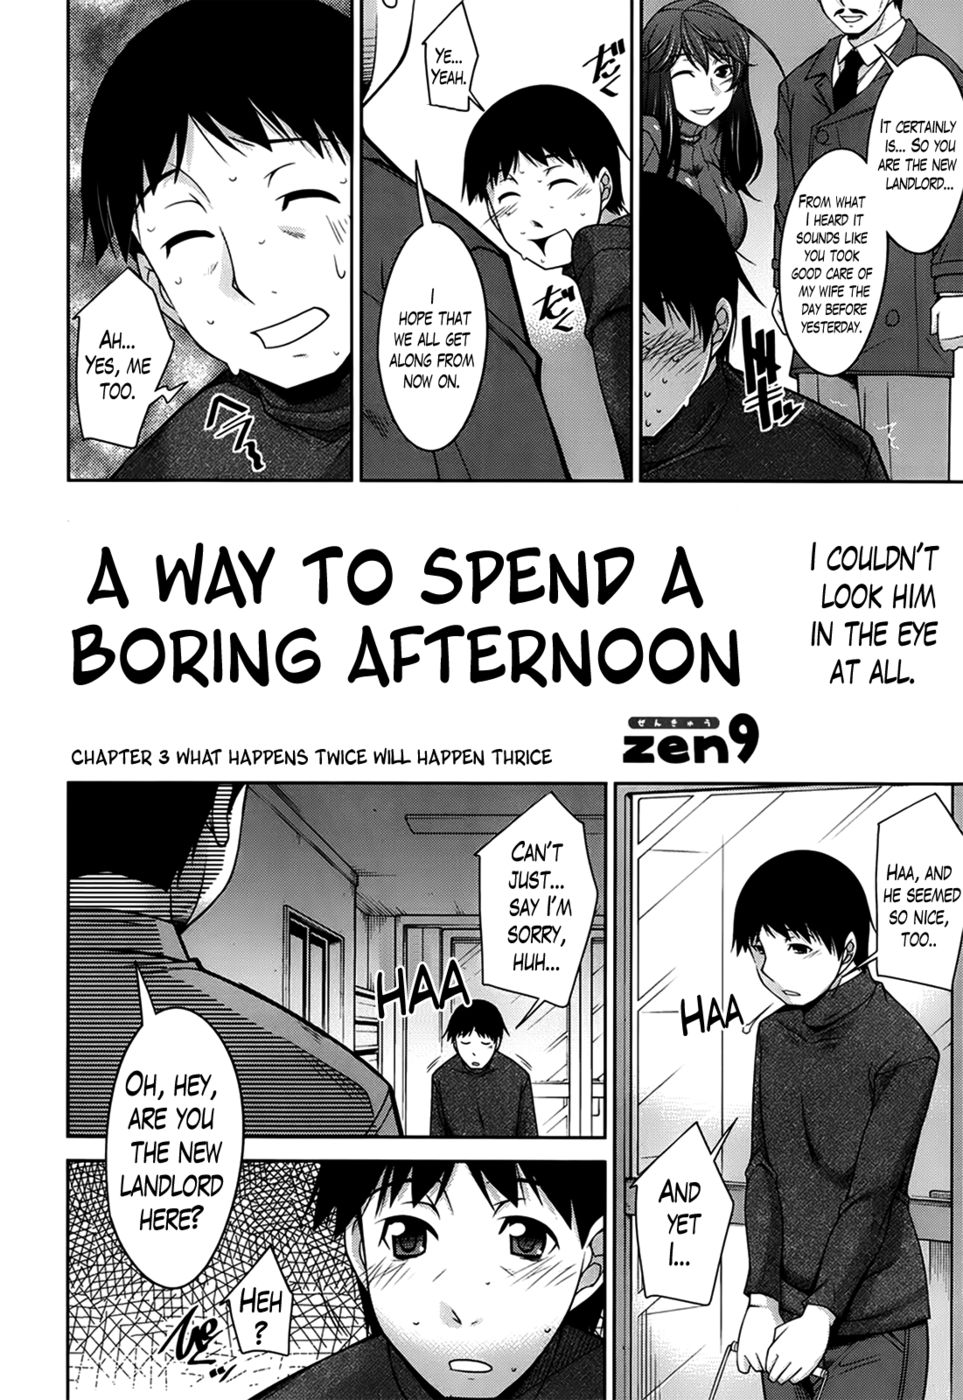 Hentai Manga Comic-A Way to Spend a Boring Afternoon-Chapter 3-2